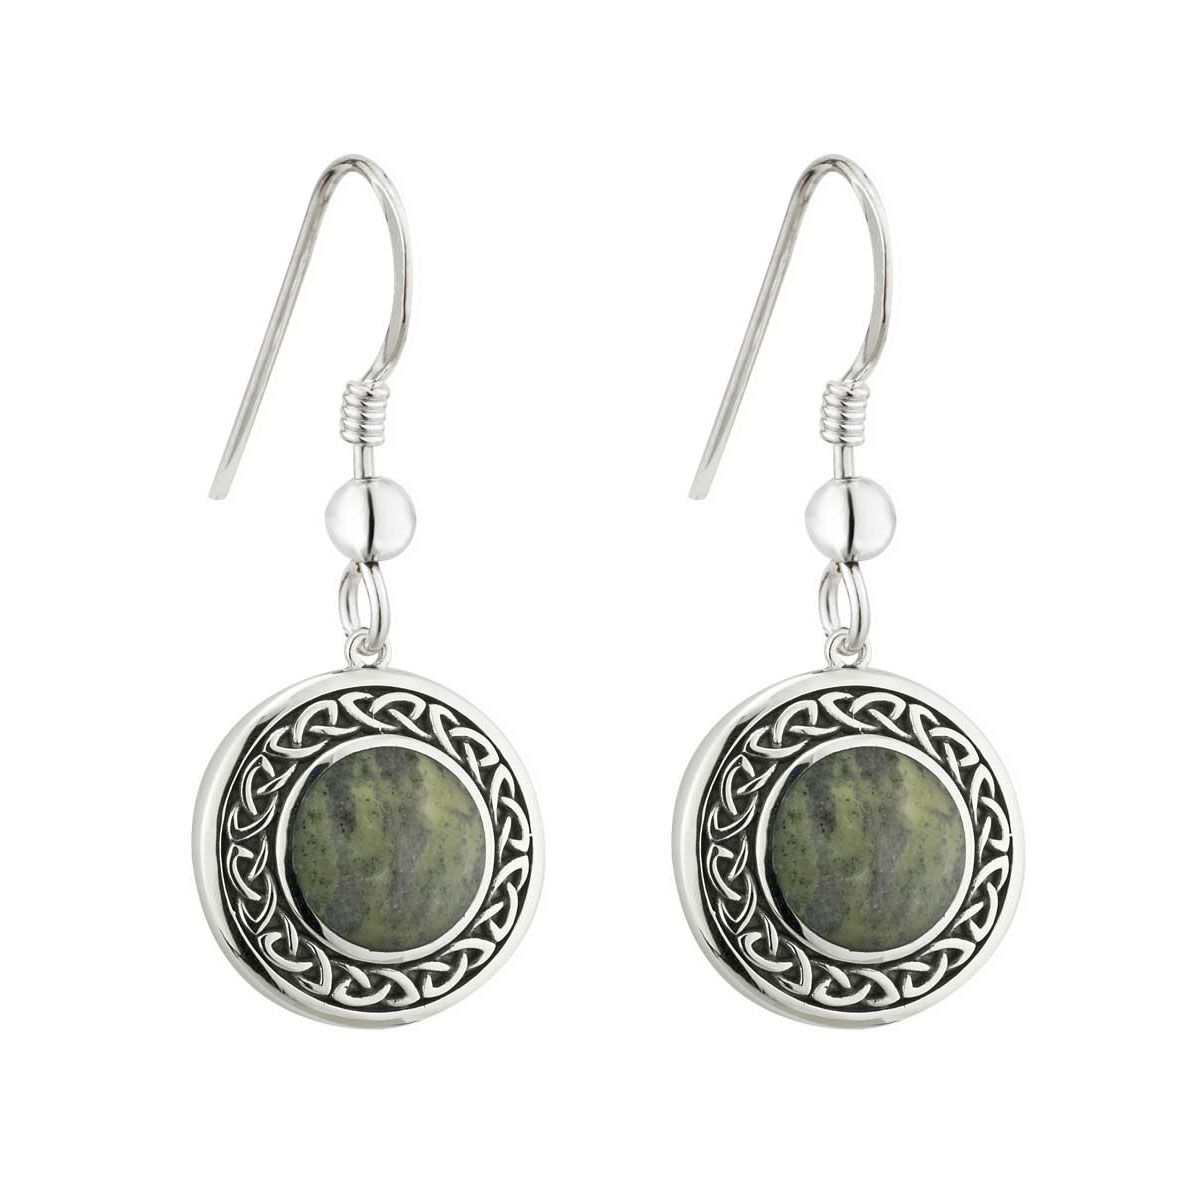 Cashs Ireland, Sterling Silver and Connemara Marble Round Celtic Drop Earrings Pair